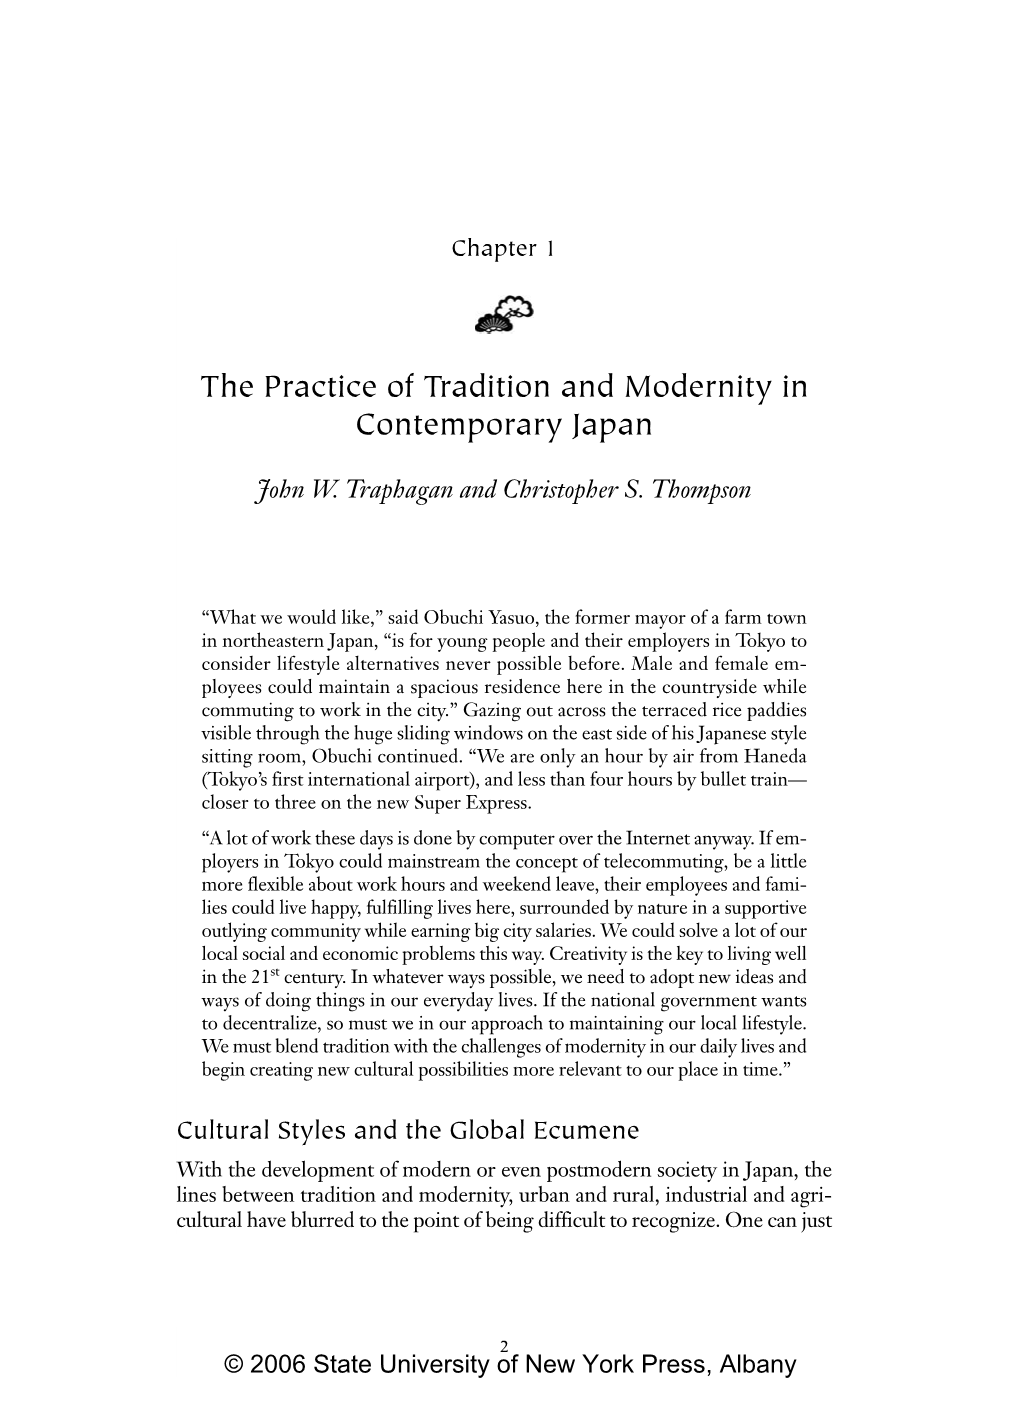 The Practice of Tradition and Modernity in Contemporary Japan